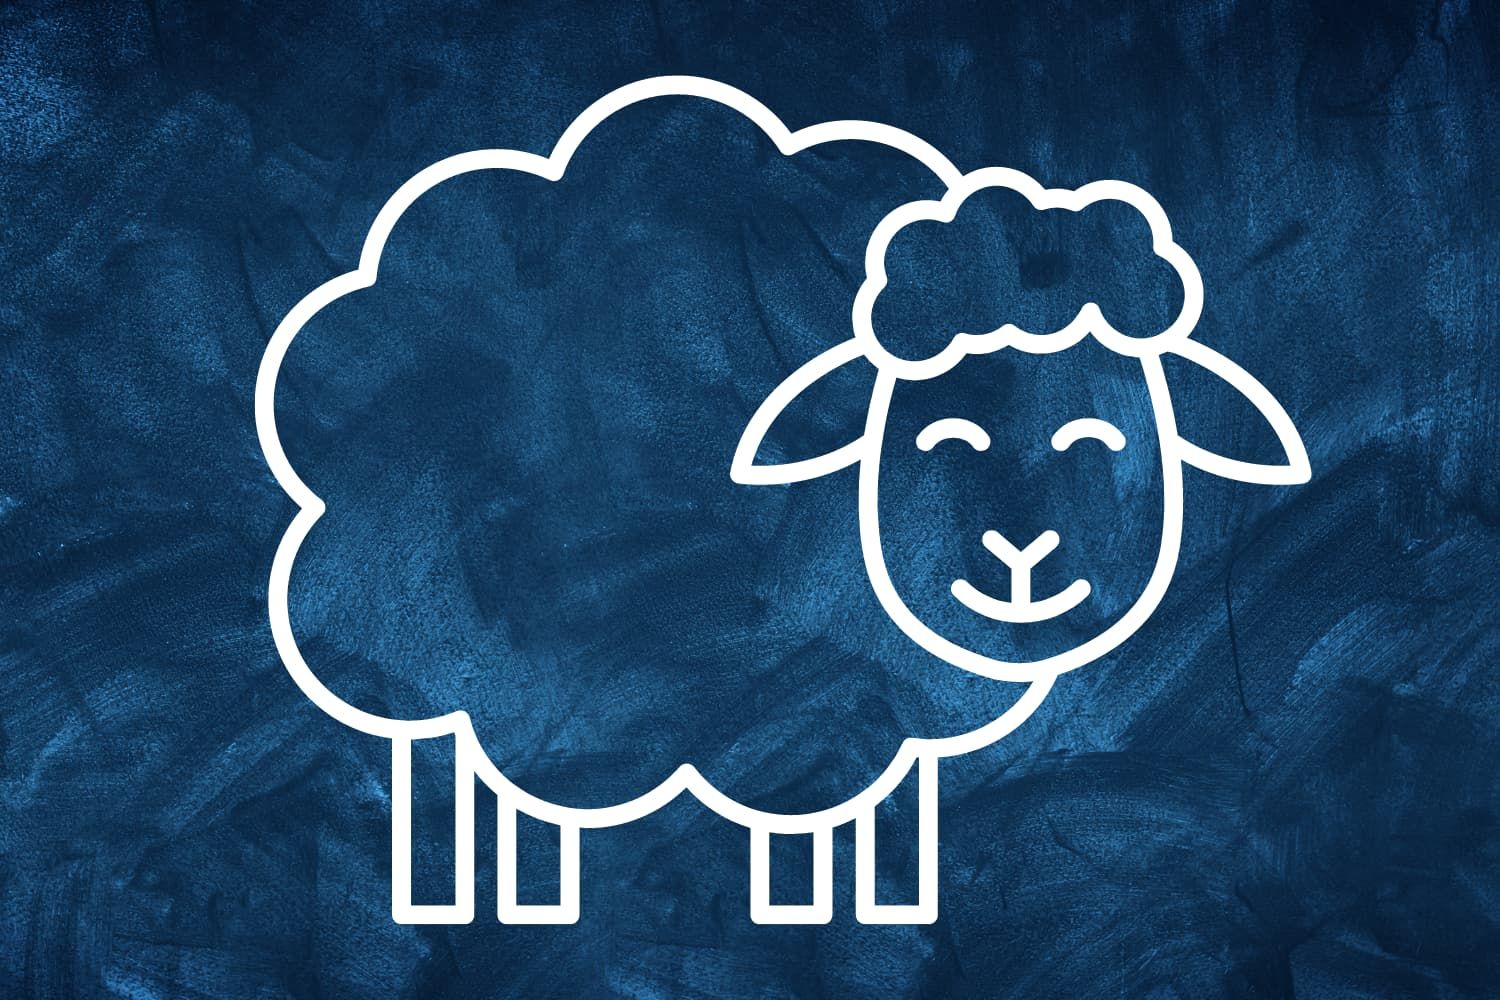 Craft%20-%20NT%20Parable%20of%20the%20lost%20sheep%20-%20Create%20a%20sheep-ea90aa6b Safety / security